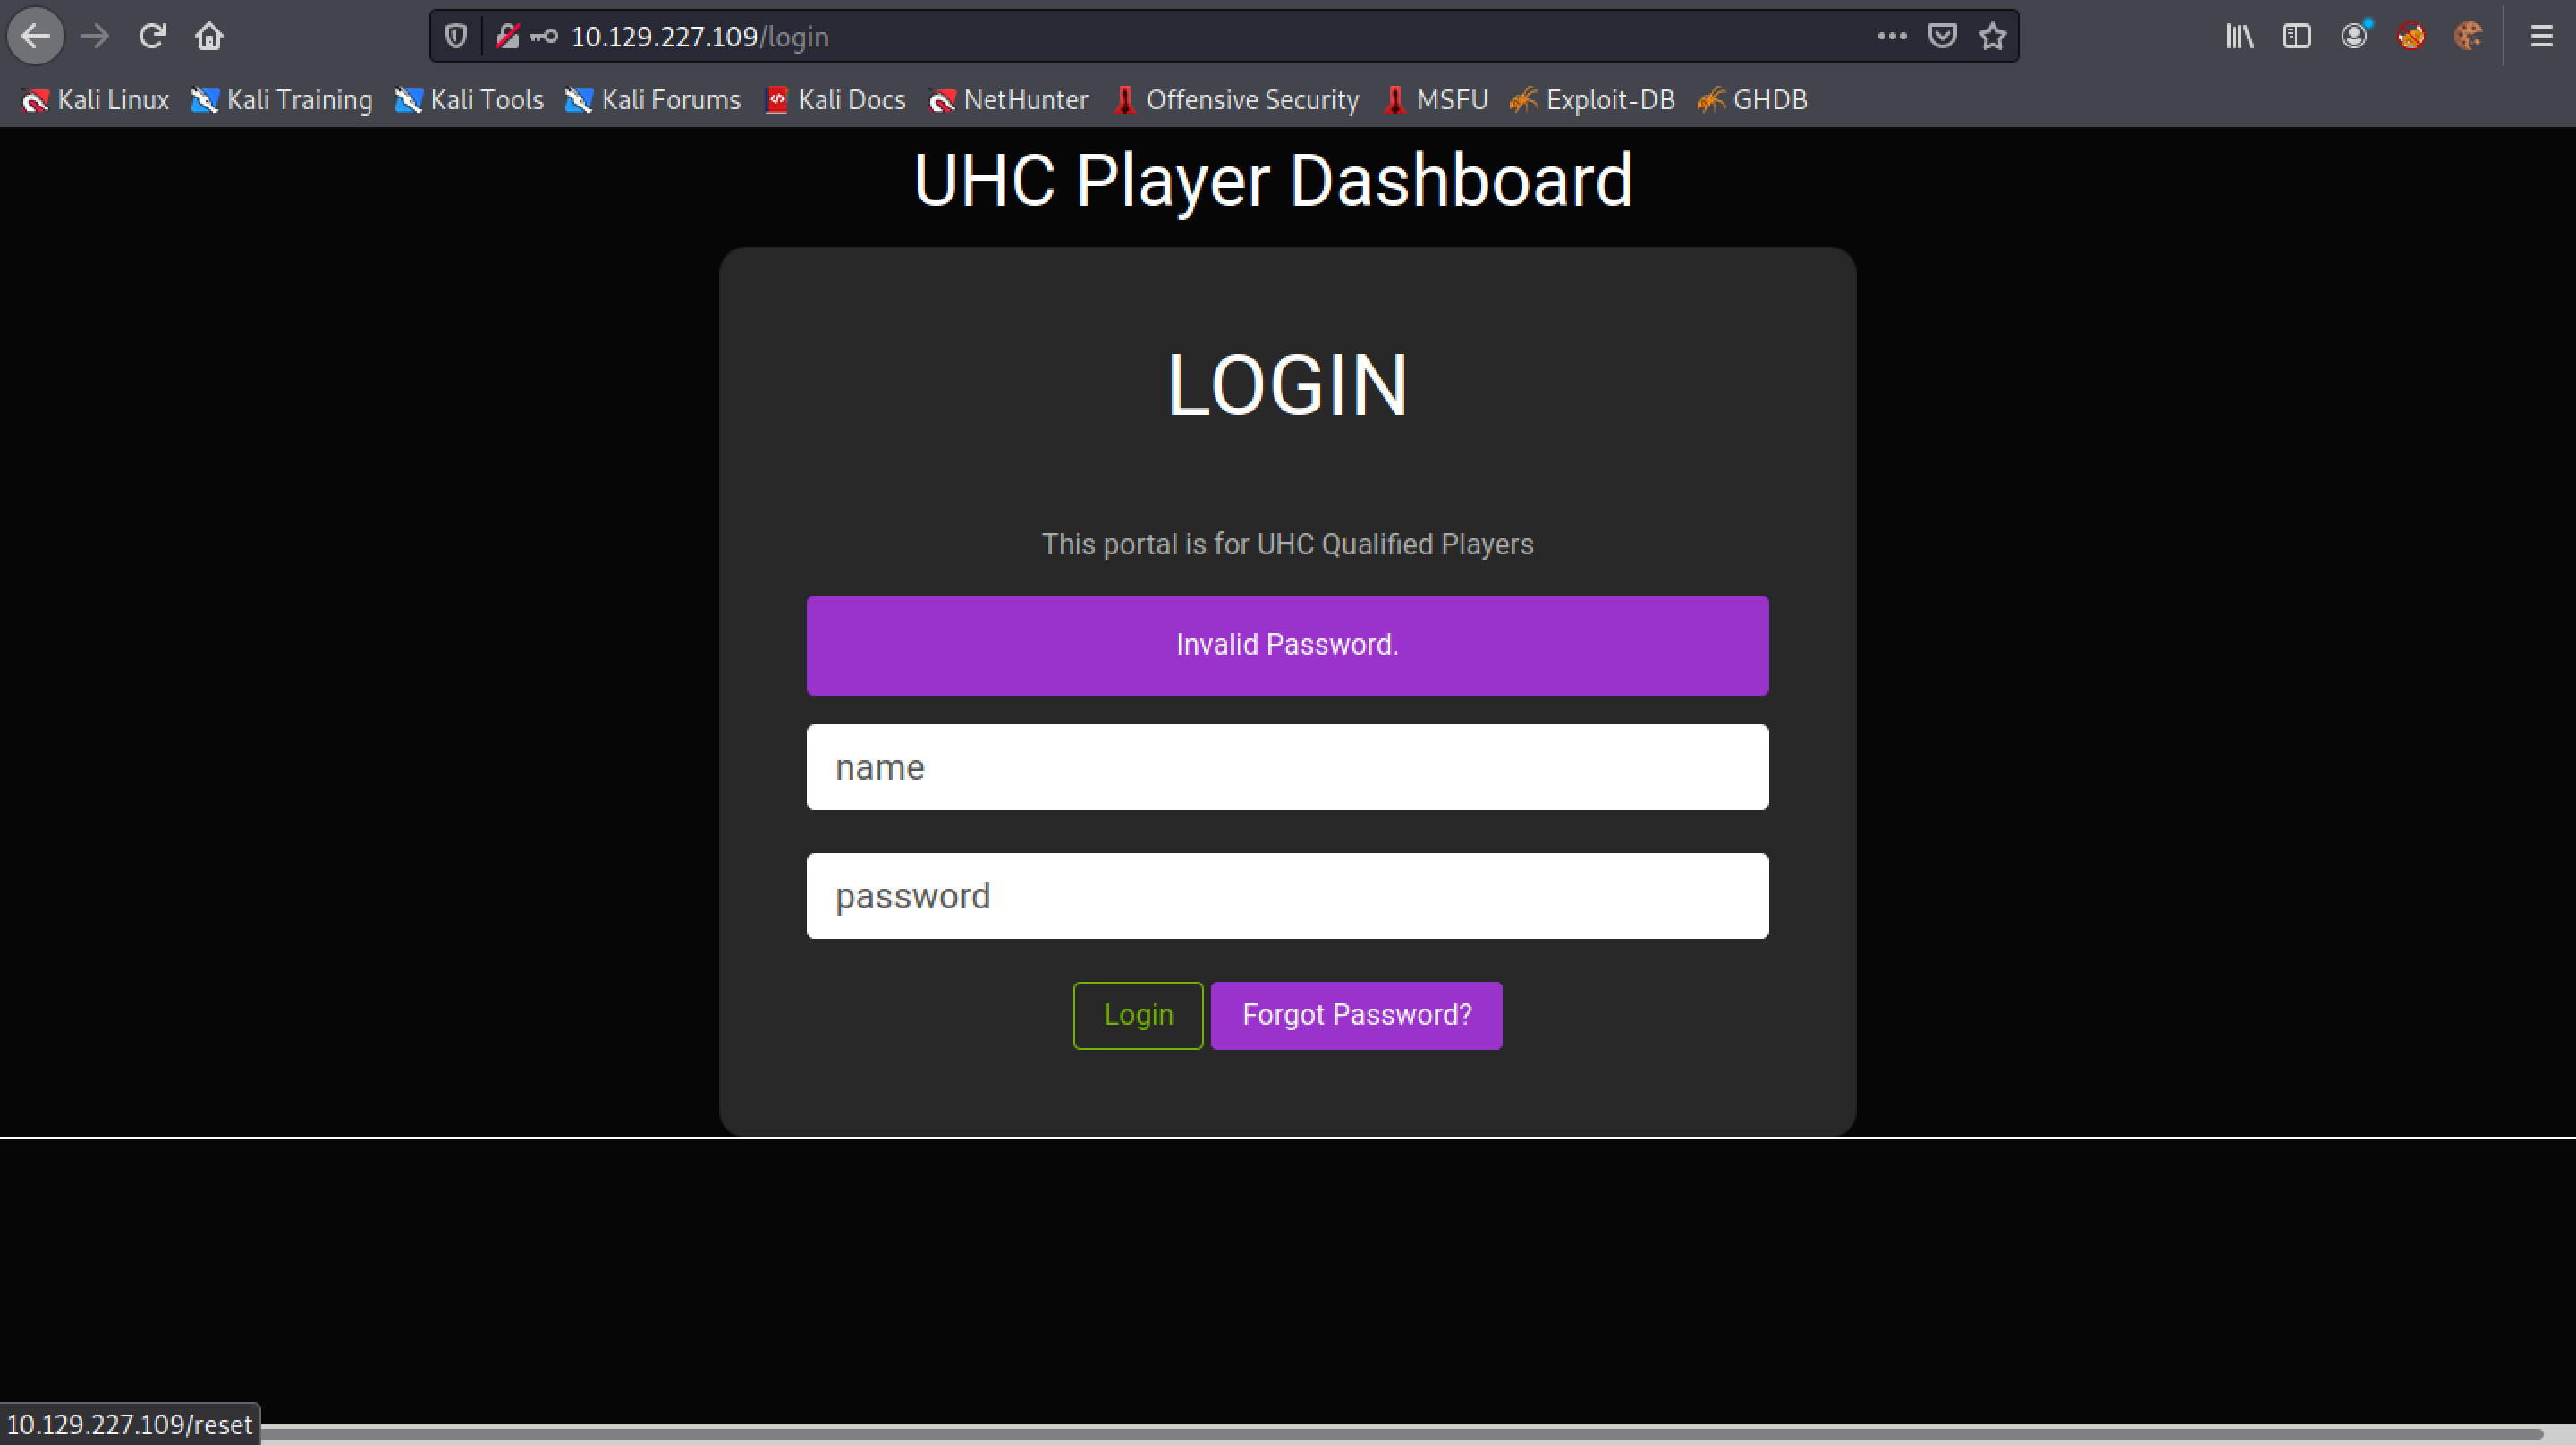 Login page of the website.